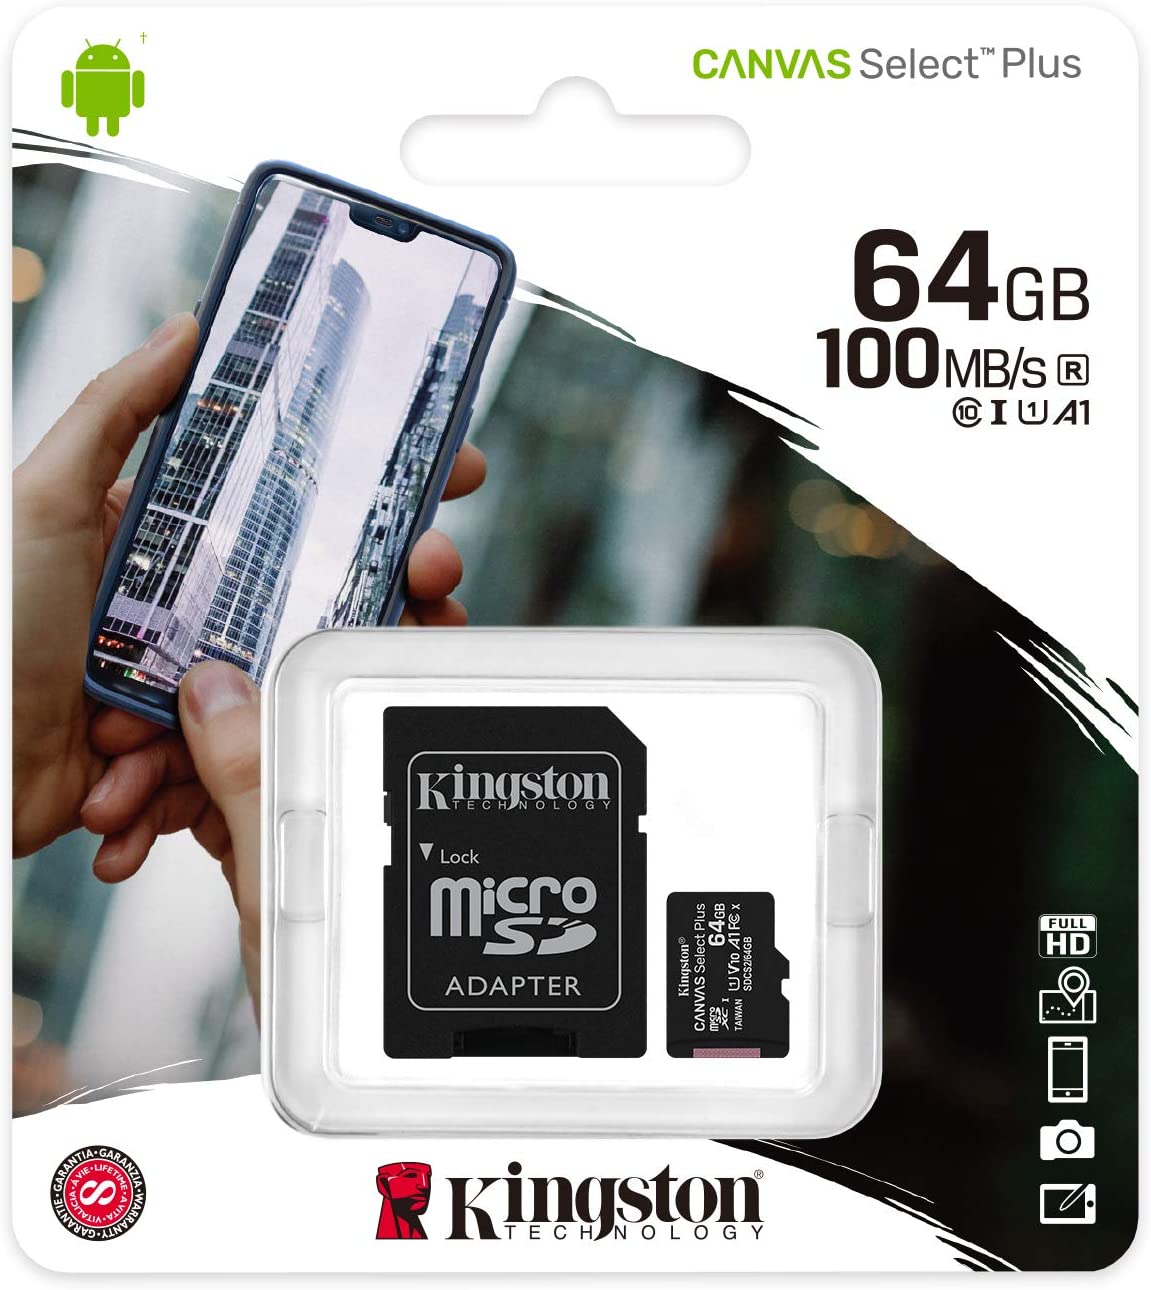 Kingston 64GB microSDXC Canvas Select Plus 100MB/s Read A1 Class 10 UHS-I Memory Card + Adapter (SDCS2/64GB) microSD Card 64GB Fast (Up to 100 MB/s) Single